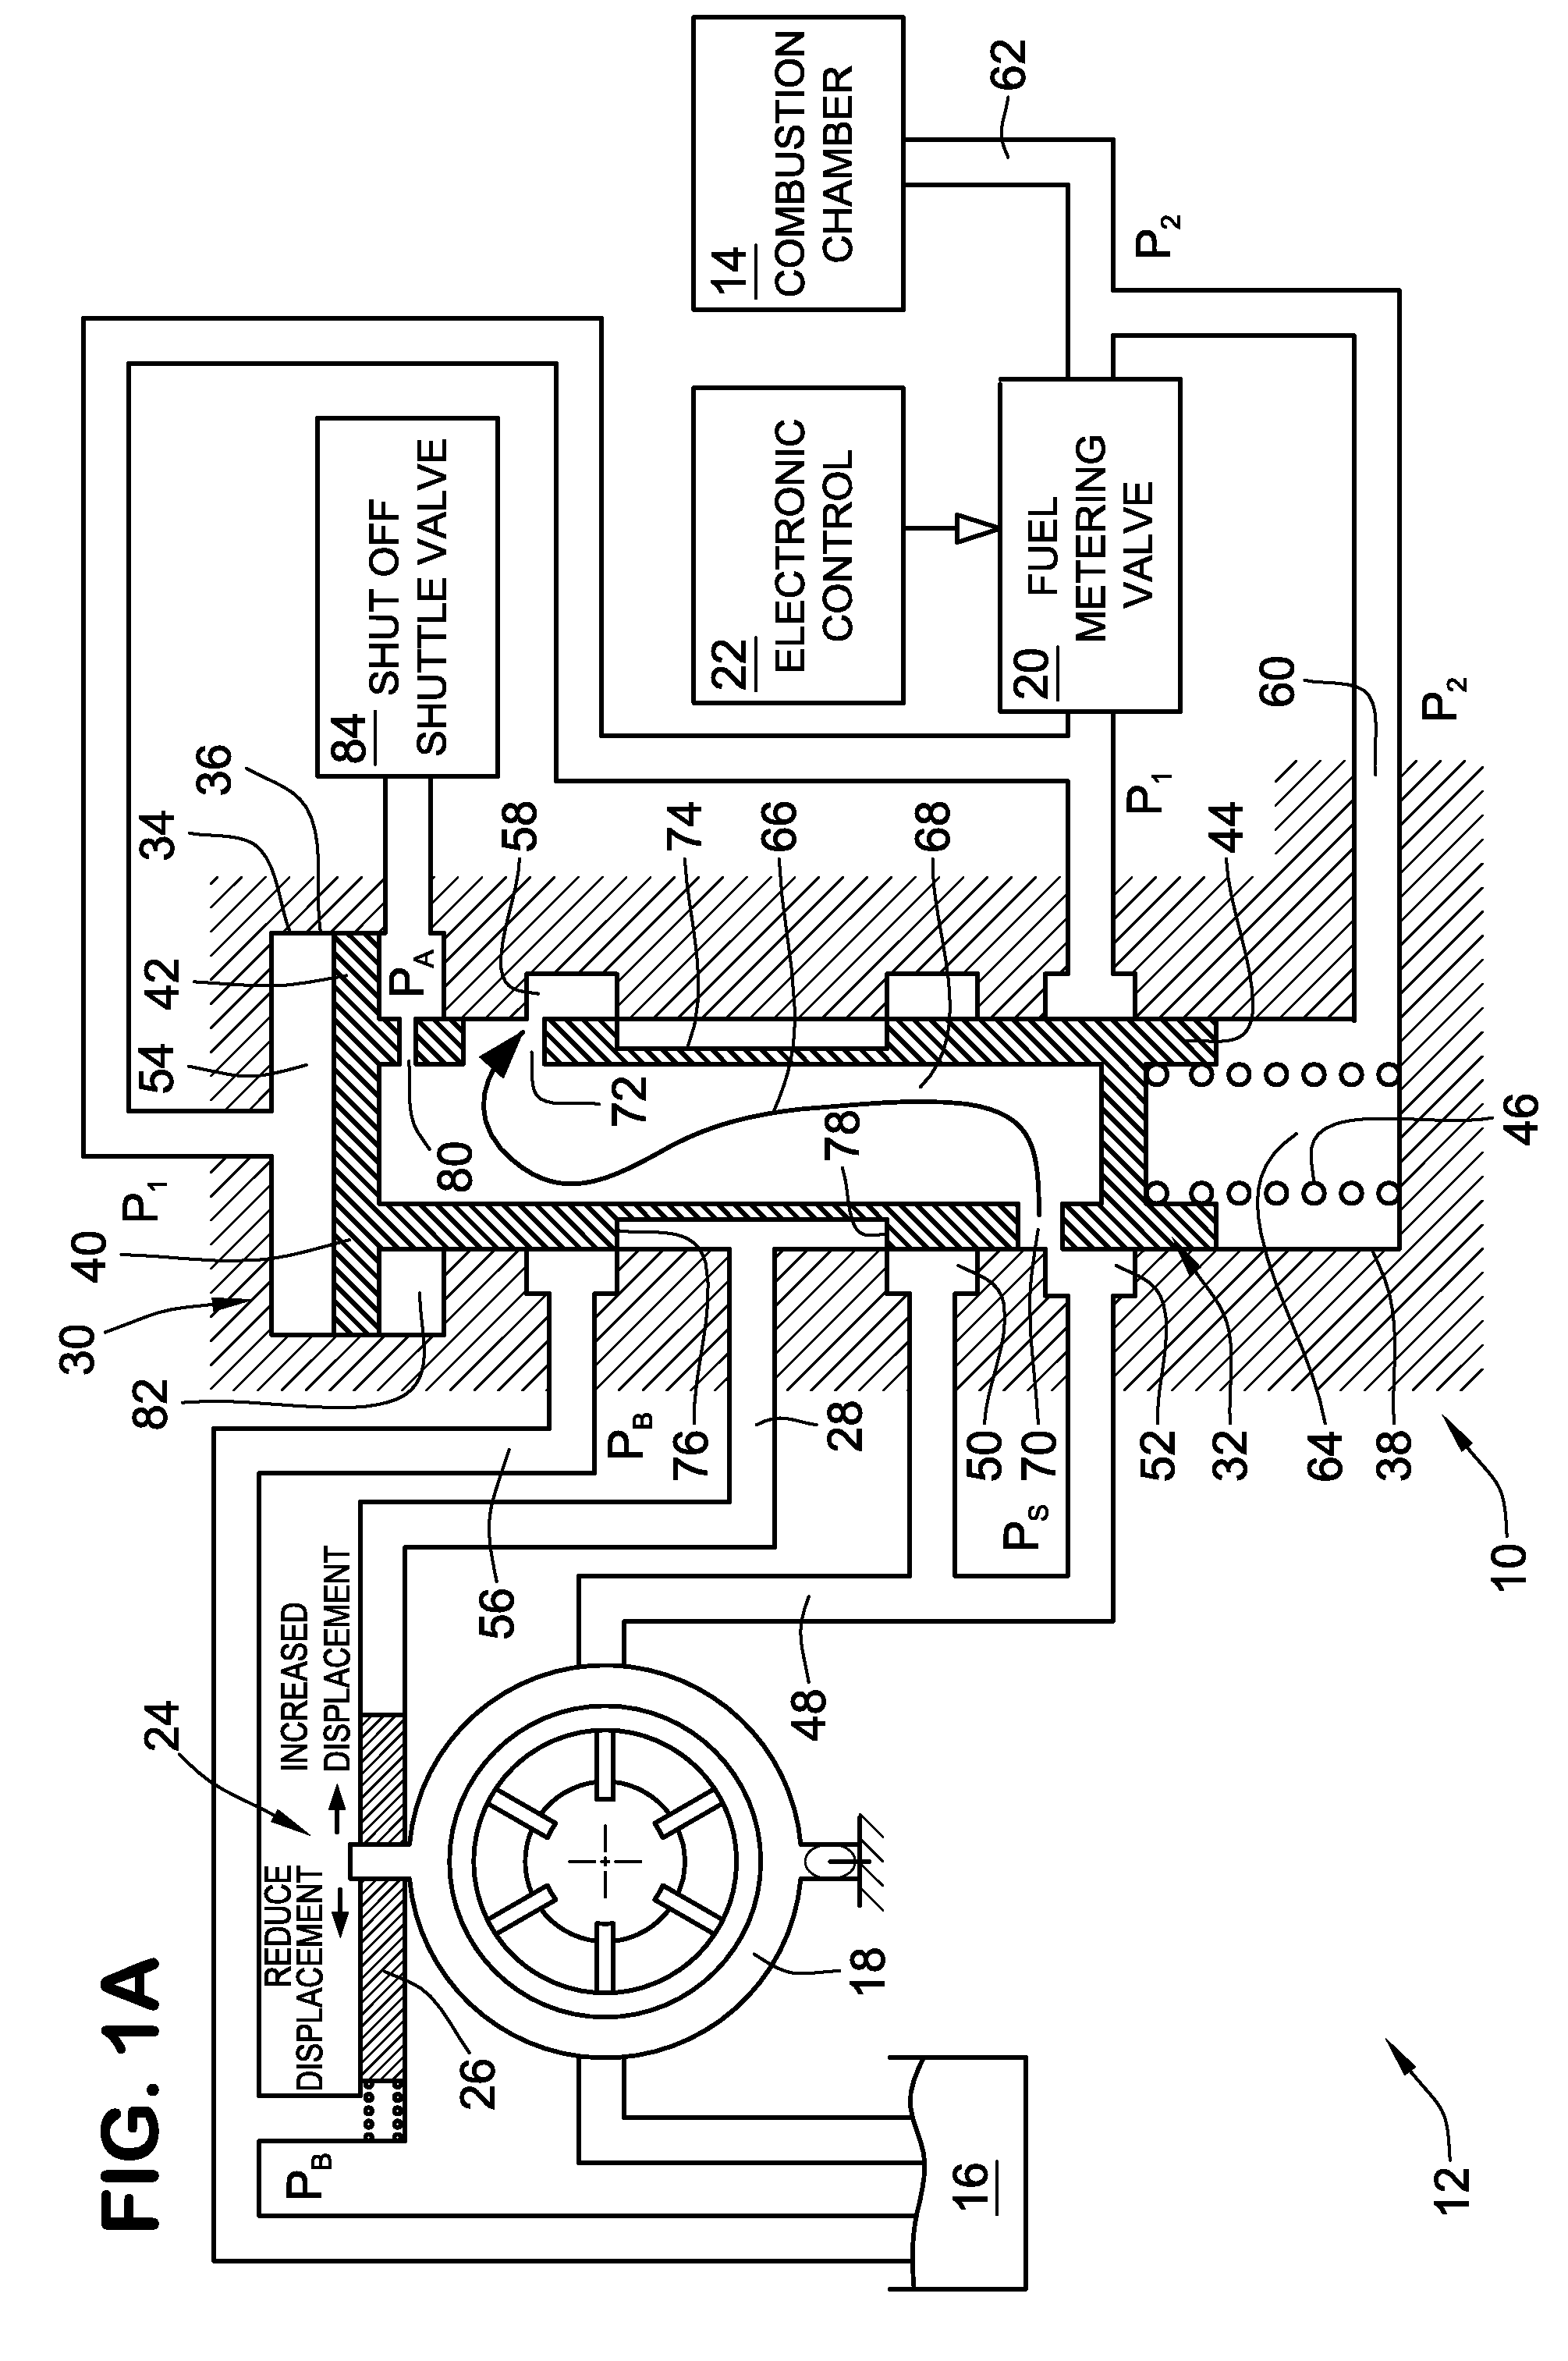 Flow Compensated Proportional Bypass Valve Combined With a Control Valve